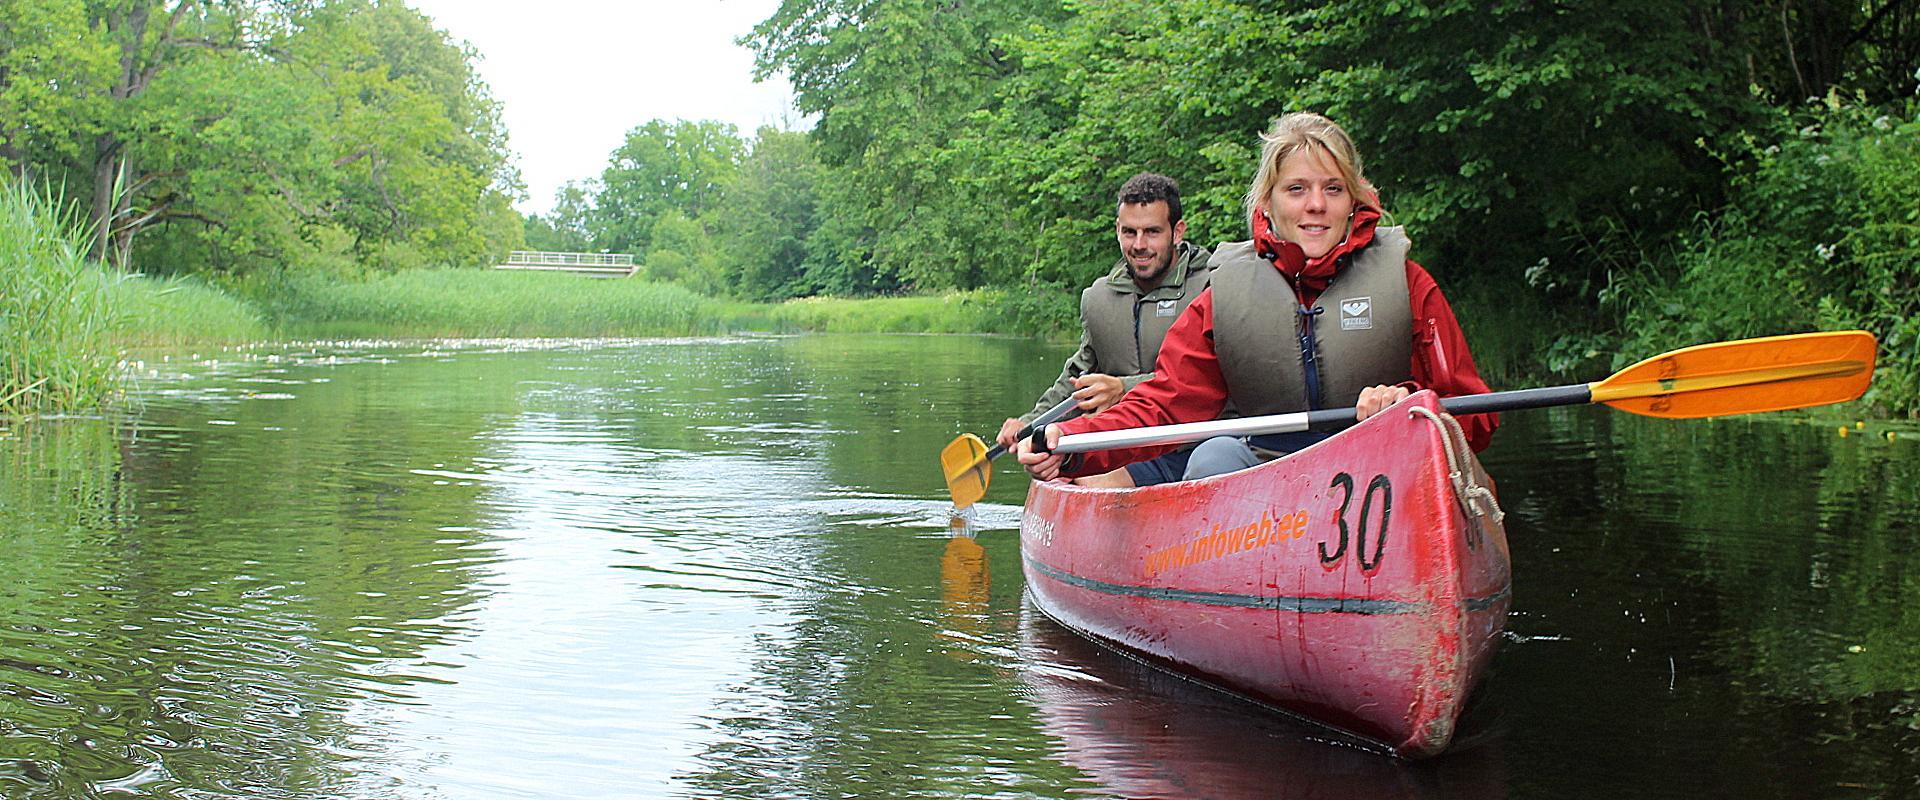 Paddling a canoe on a river is one of the best ways to get to know the nature of Soomaa National Park and naturally, it is a lovely way to relax. We r